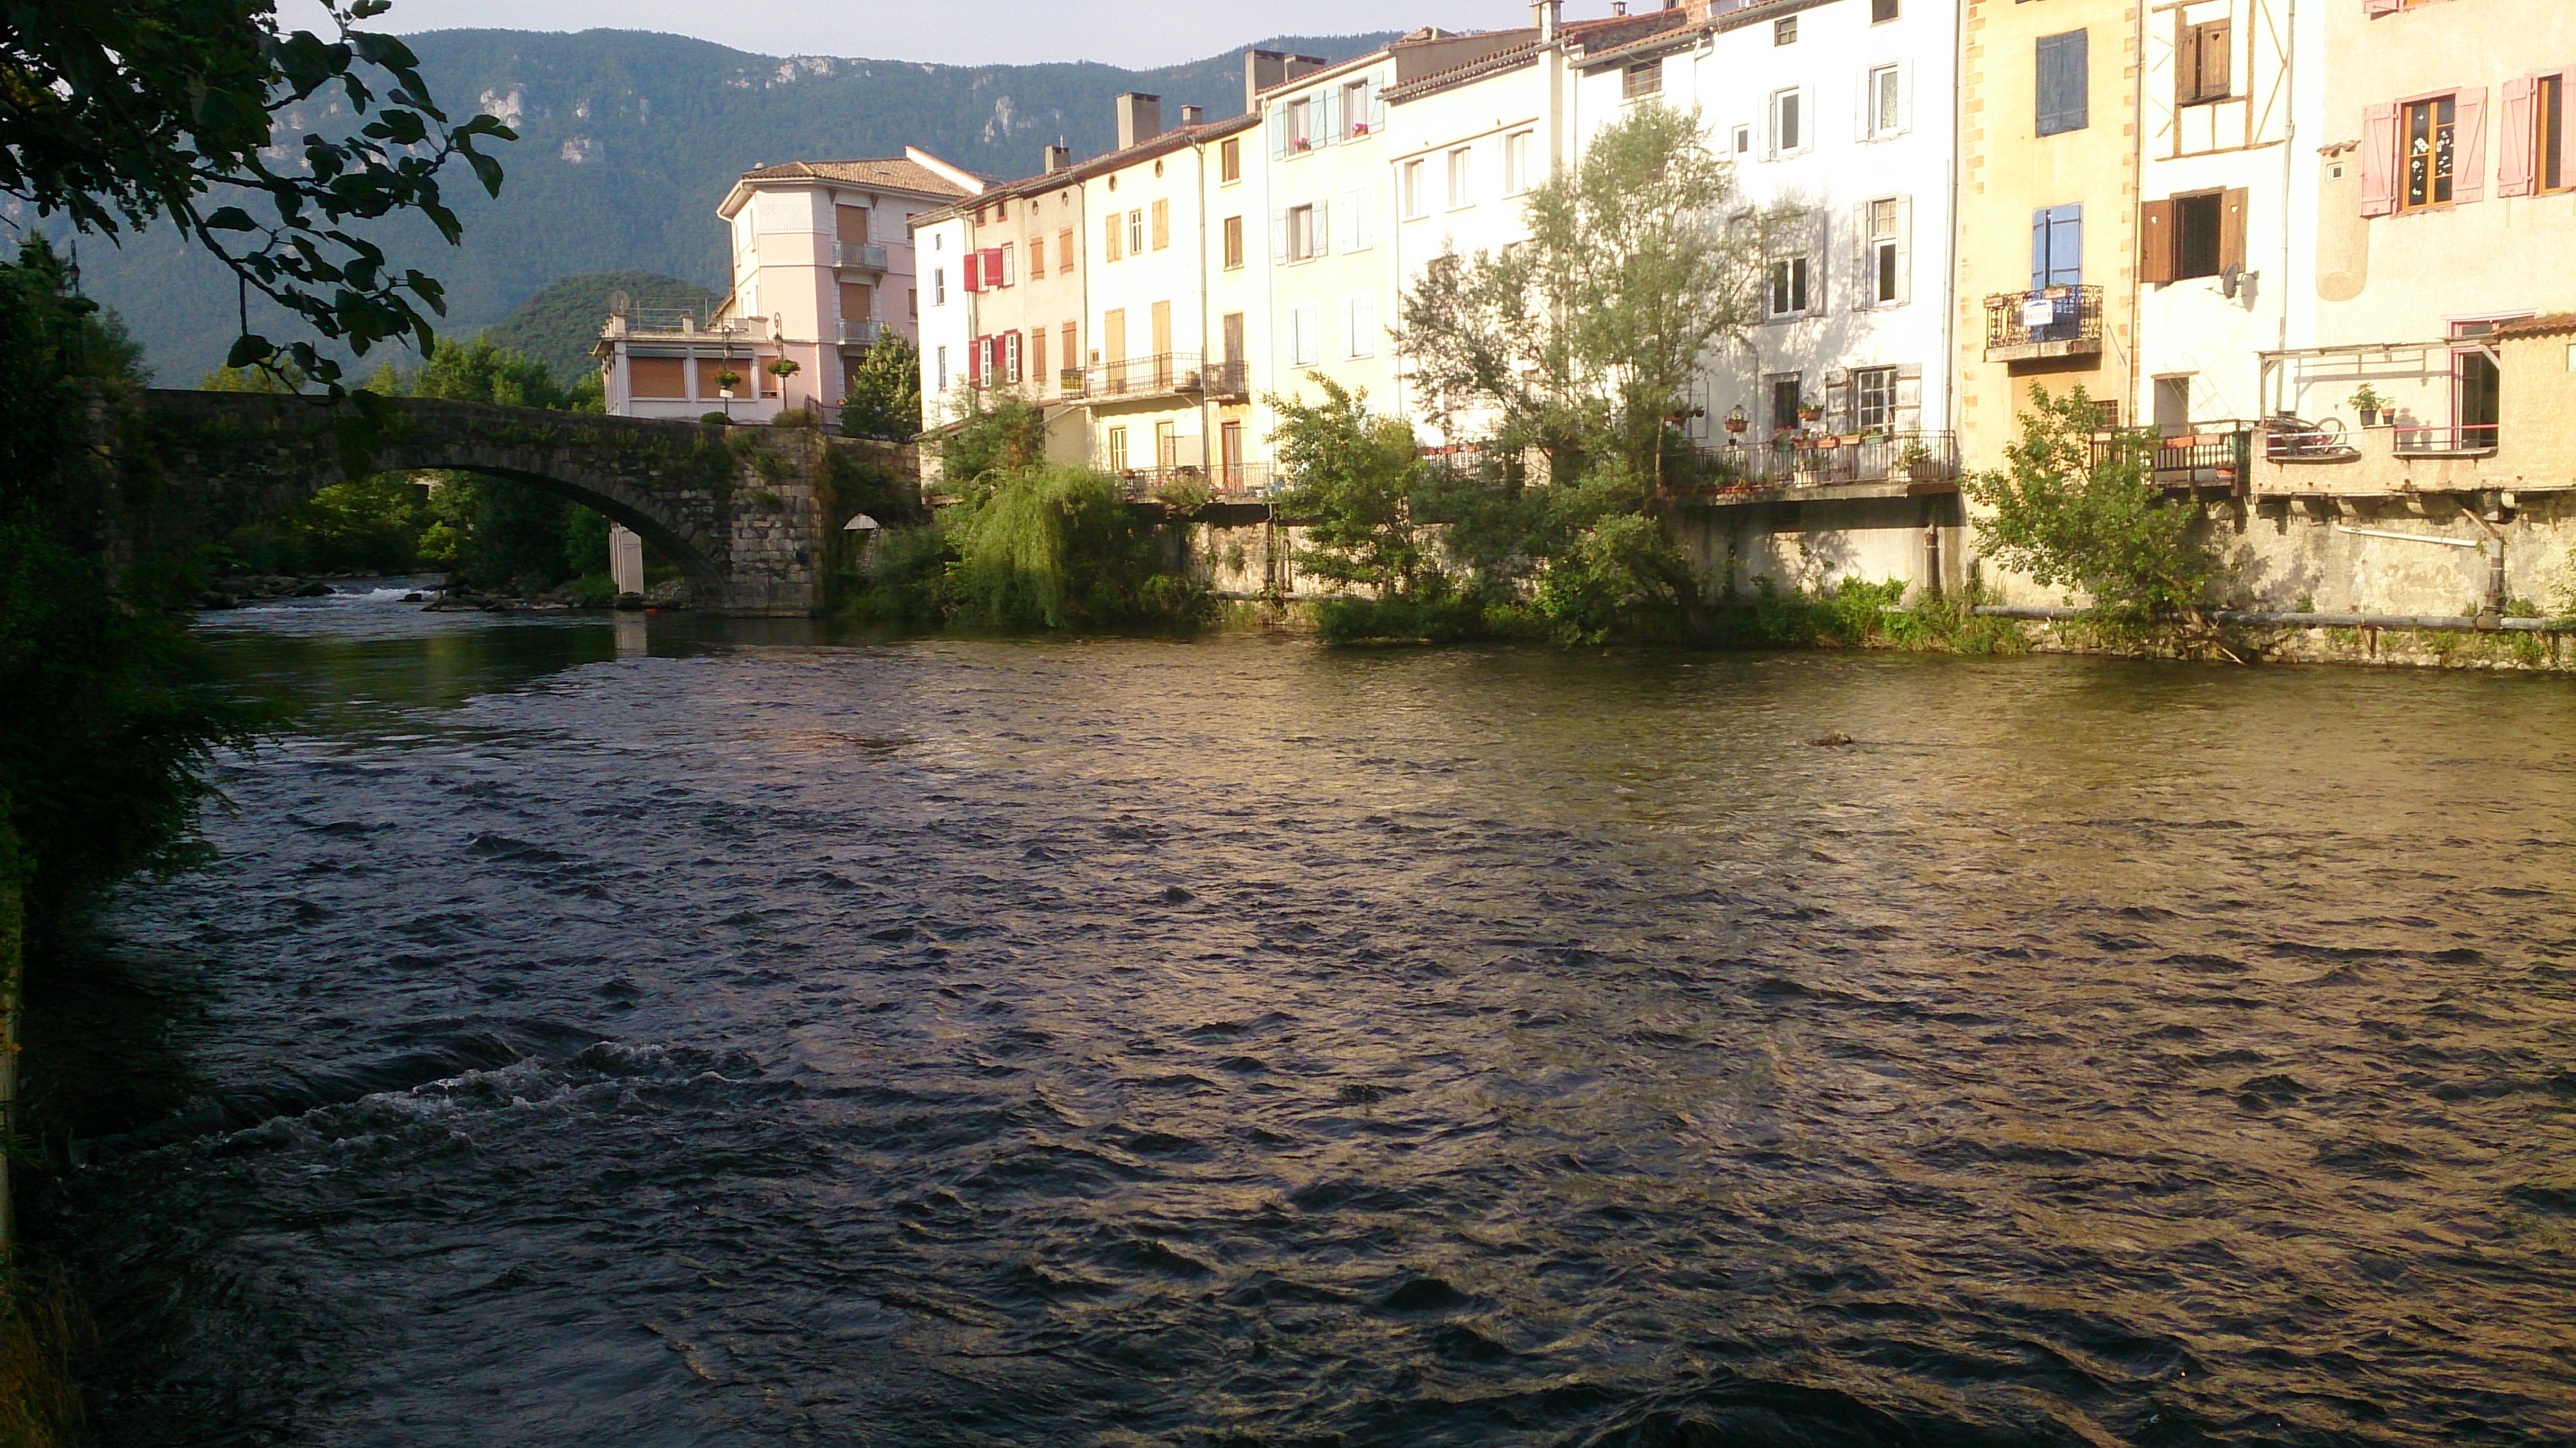 Morning sun on the river-side houses in Quillan from across the Aude